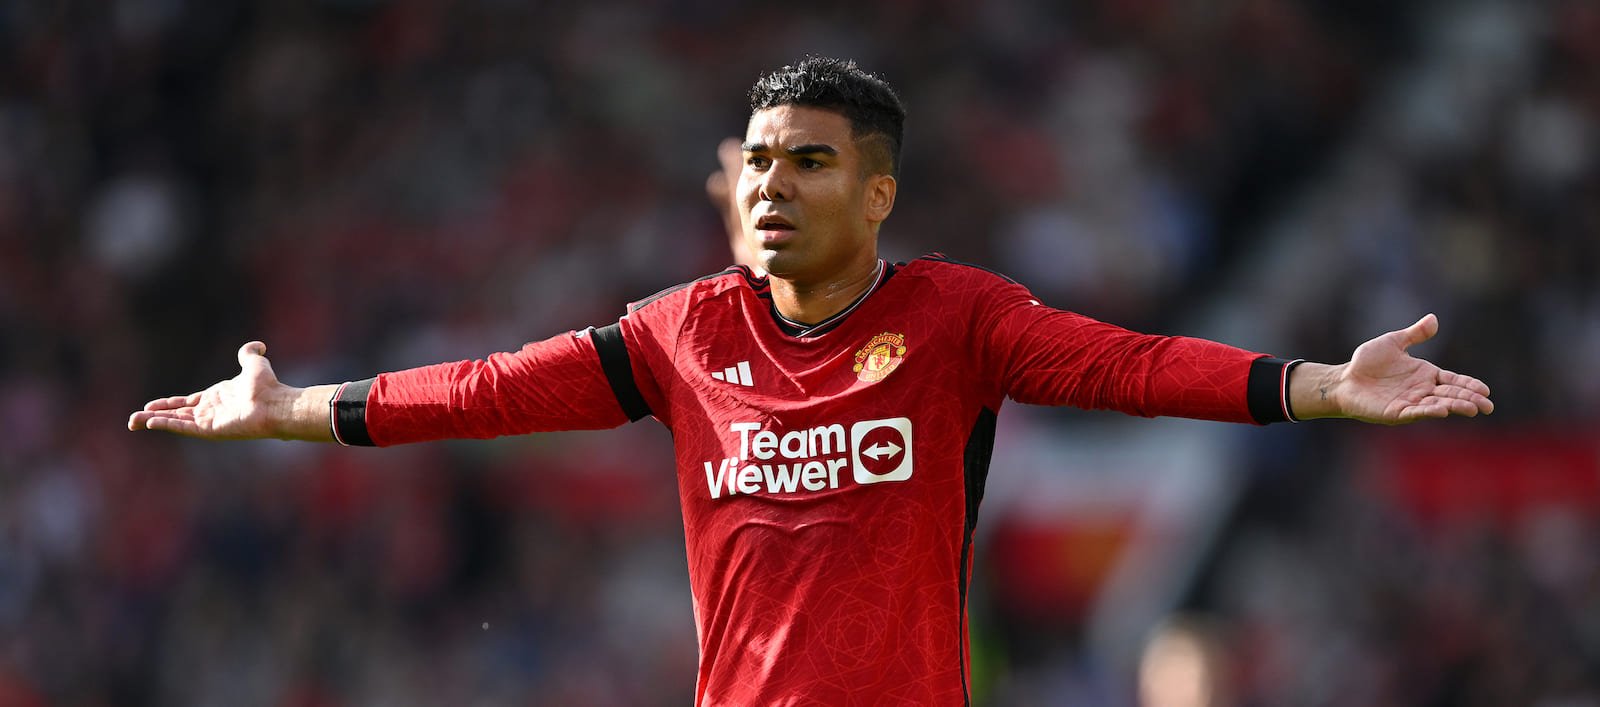 Dutch legend Ruud Gullit blames Man United’s woes on “over-seasoned” stars, names two examples – Man United News And Transfer News